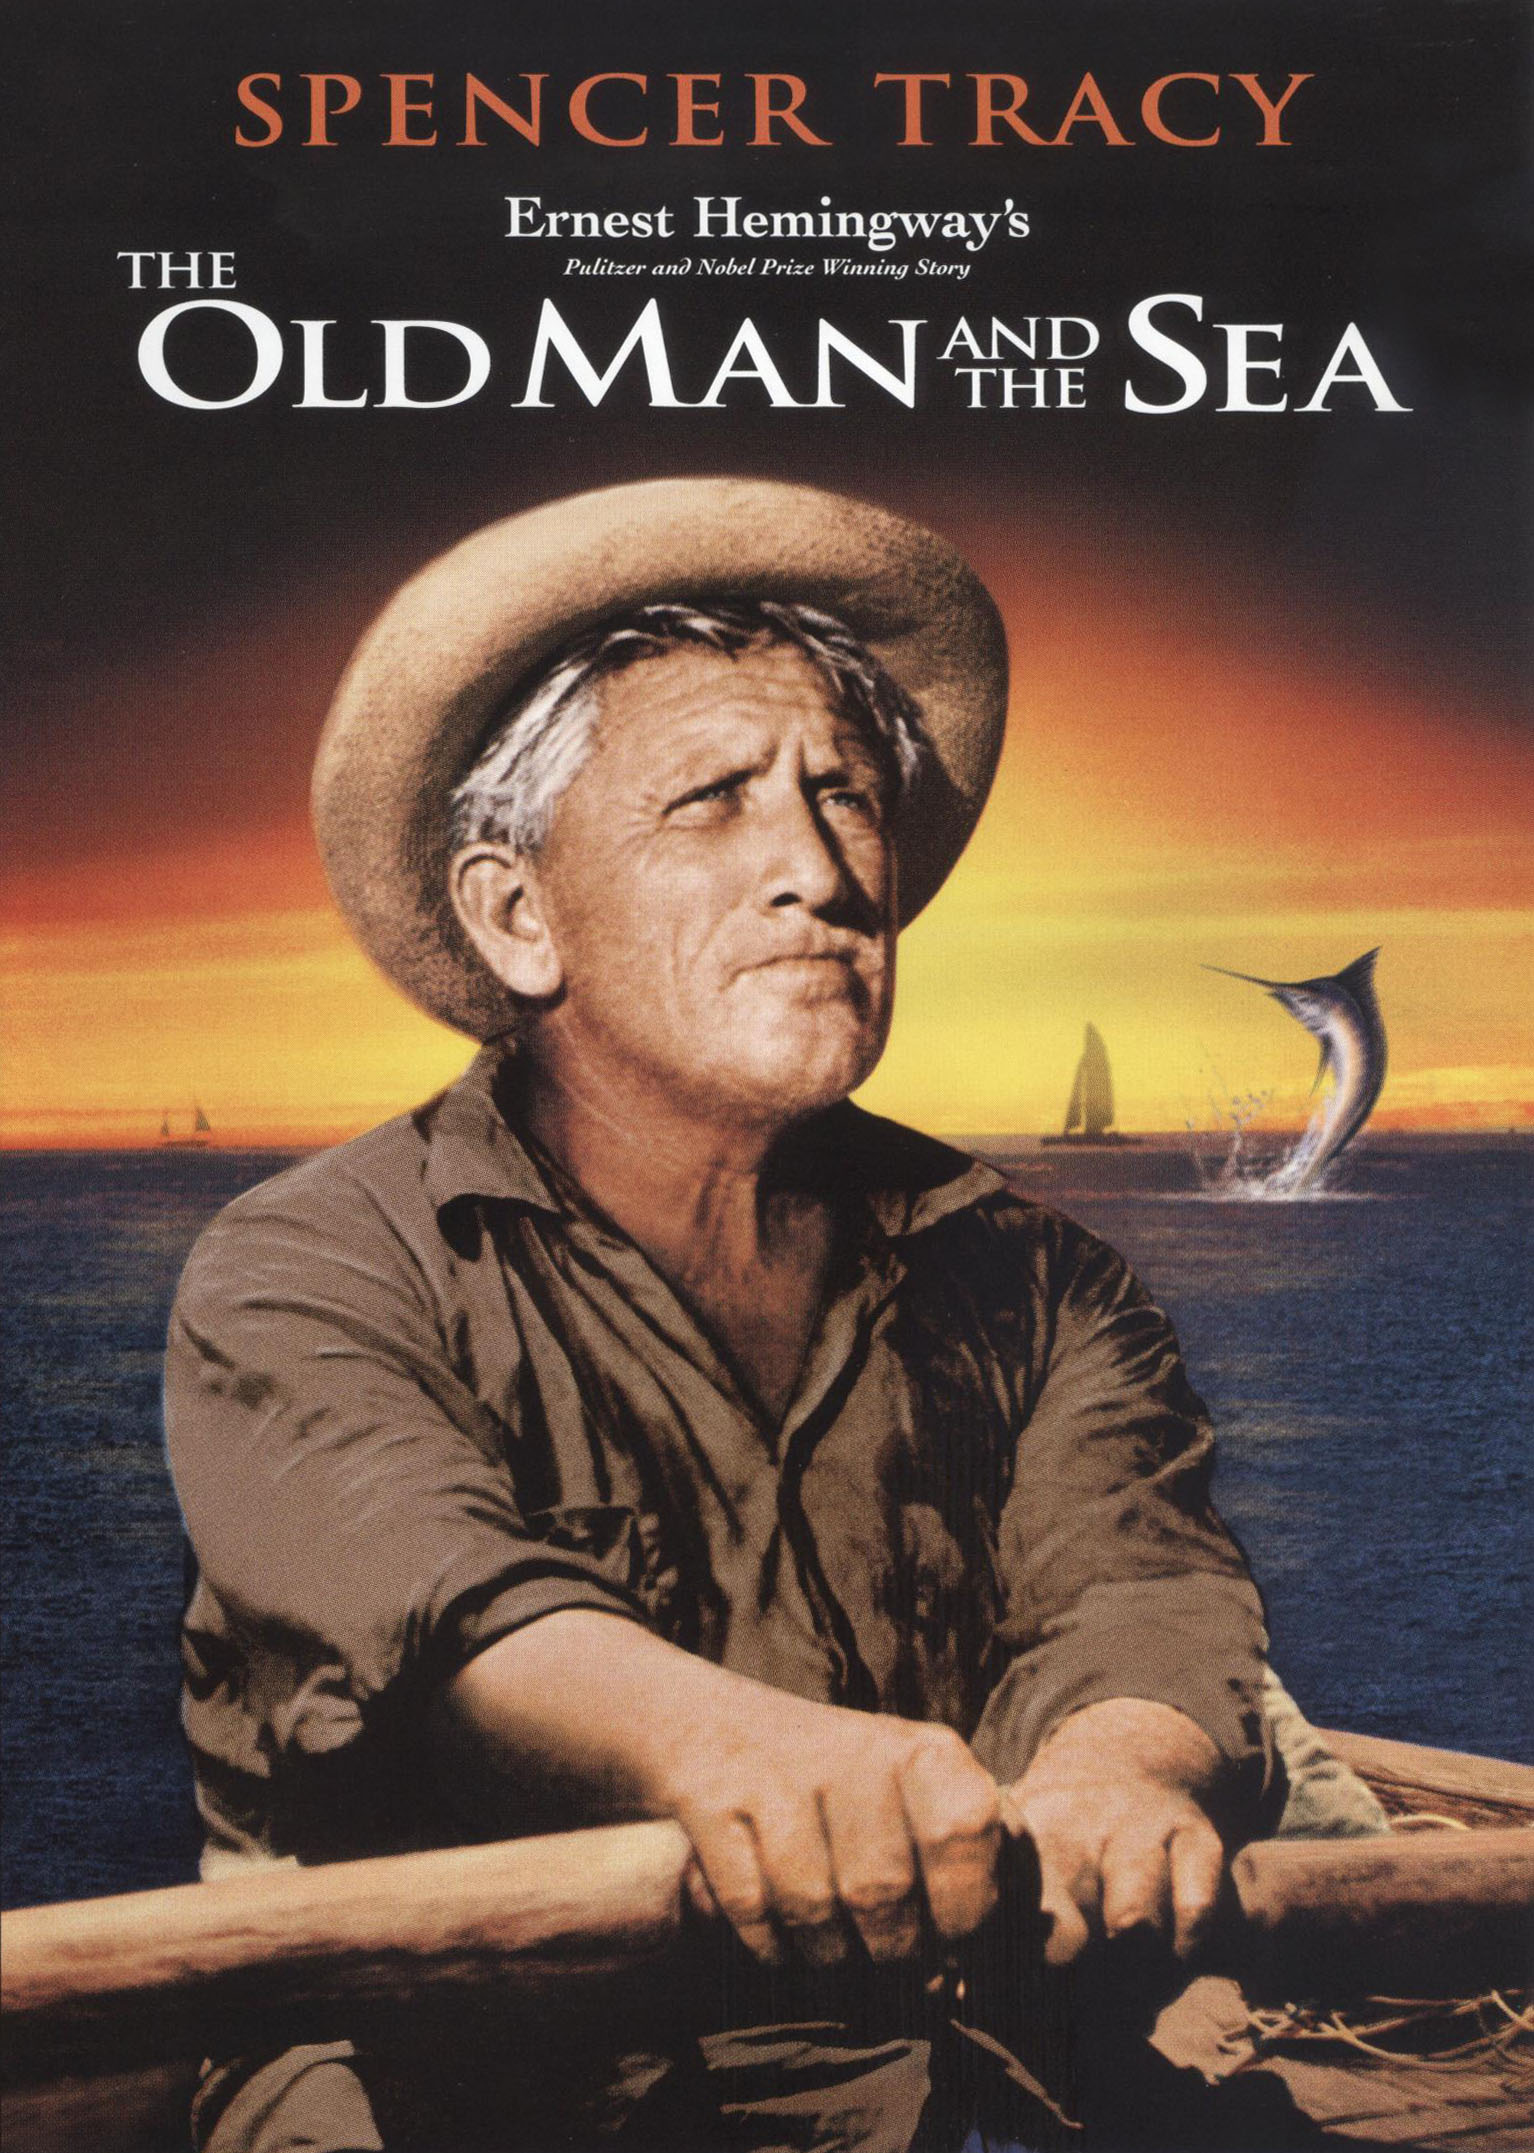 The Old Man And The Sea [1958] - Best Buy